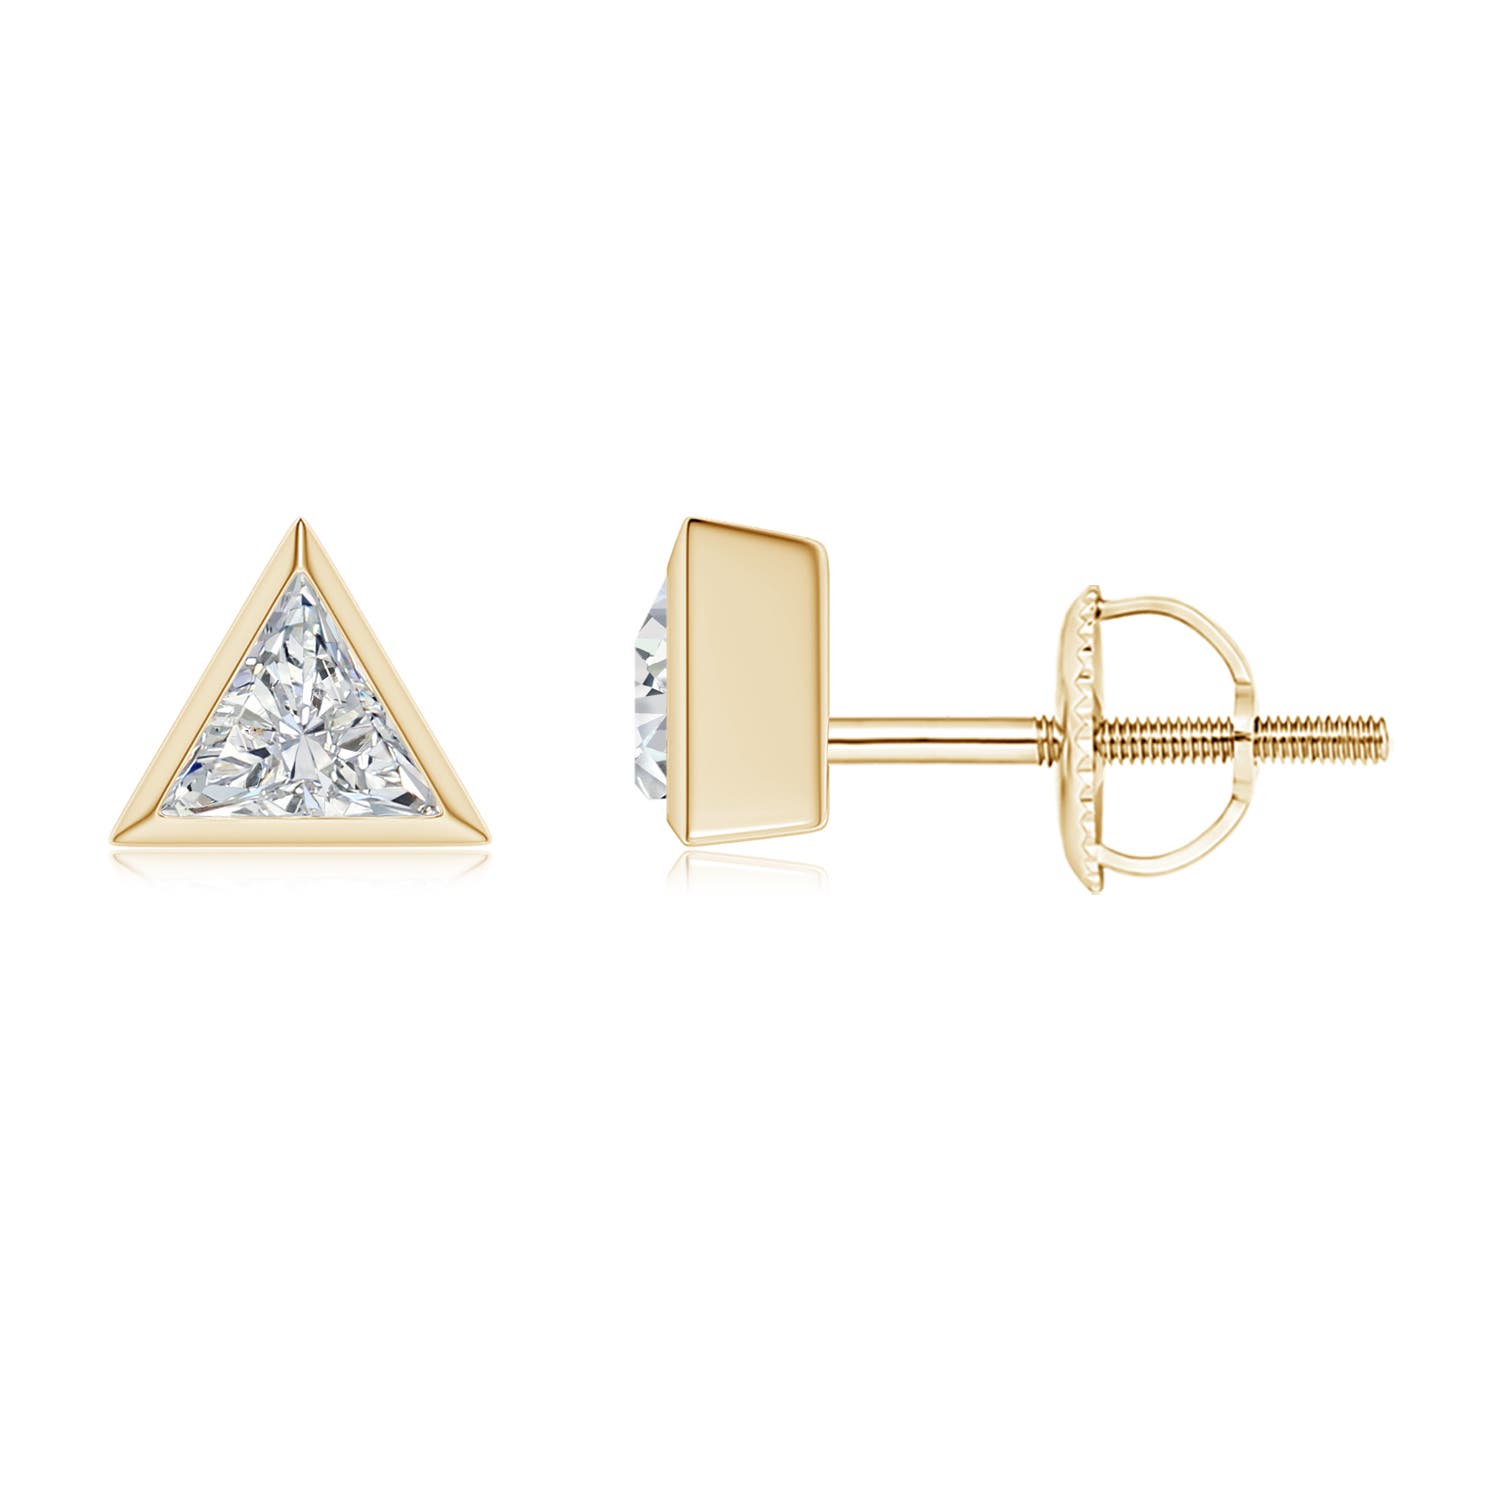 H, SI2 / 0.42 CT / 14 KT Yellow Gold